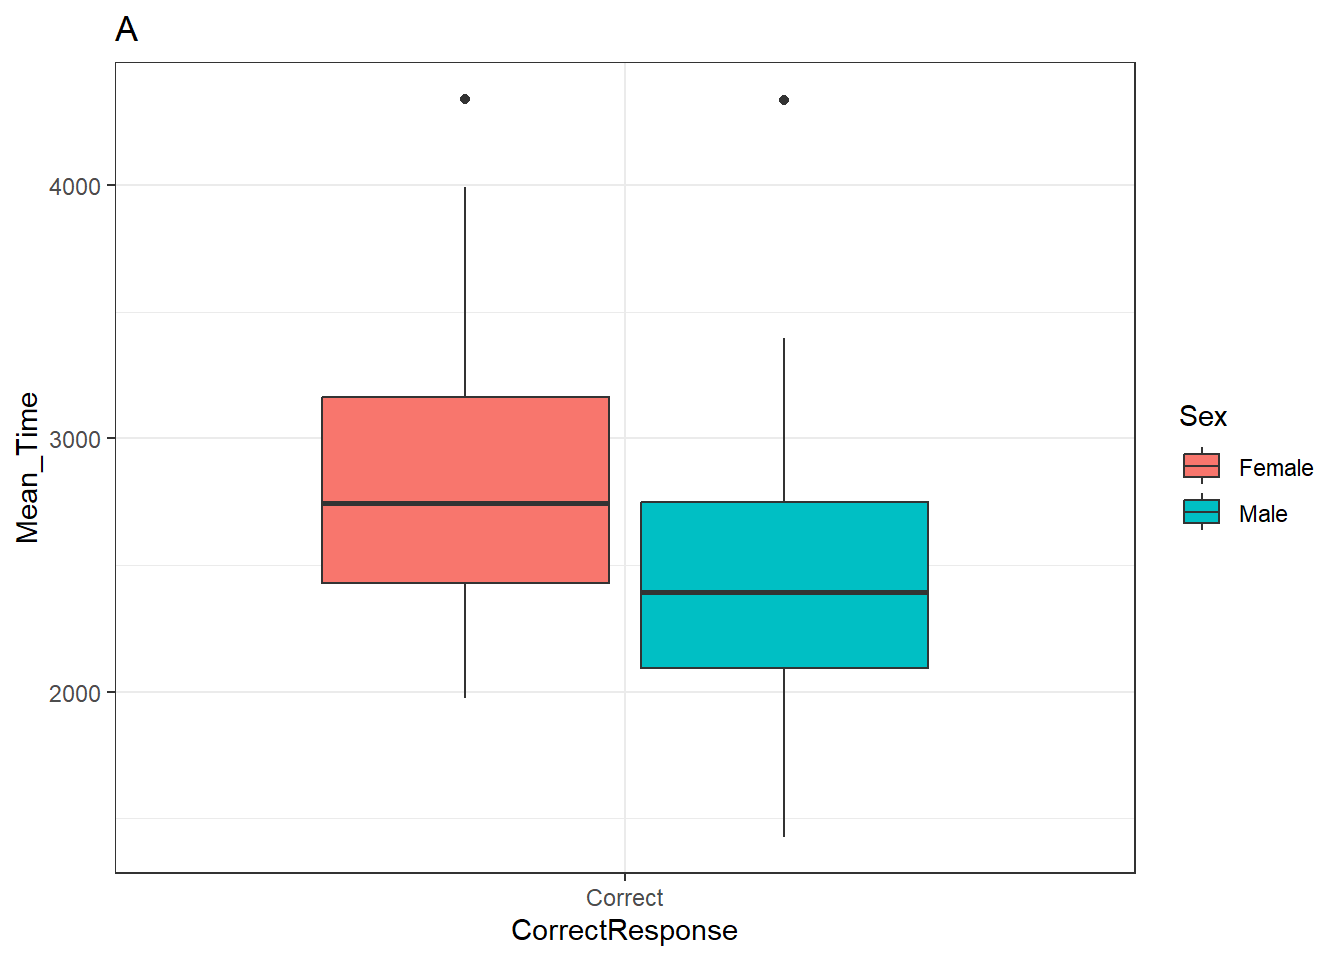 A boxplot of the spreads of Mean Time for Correct Responses by Sex